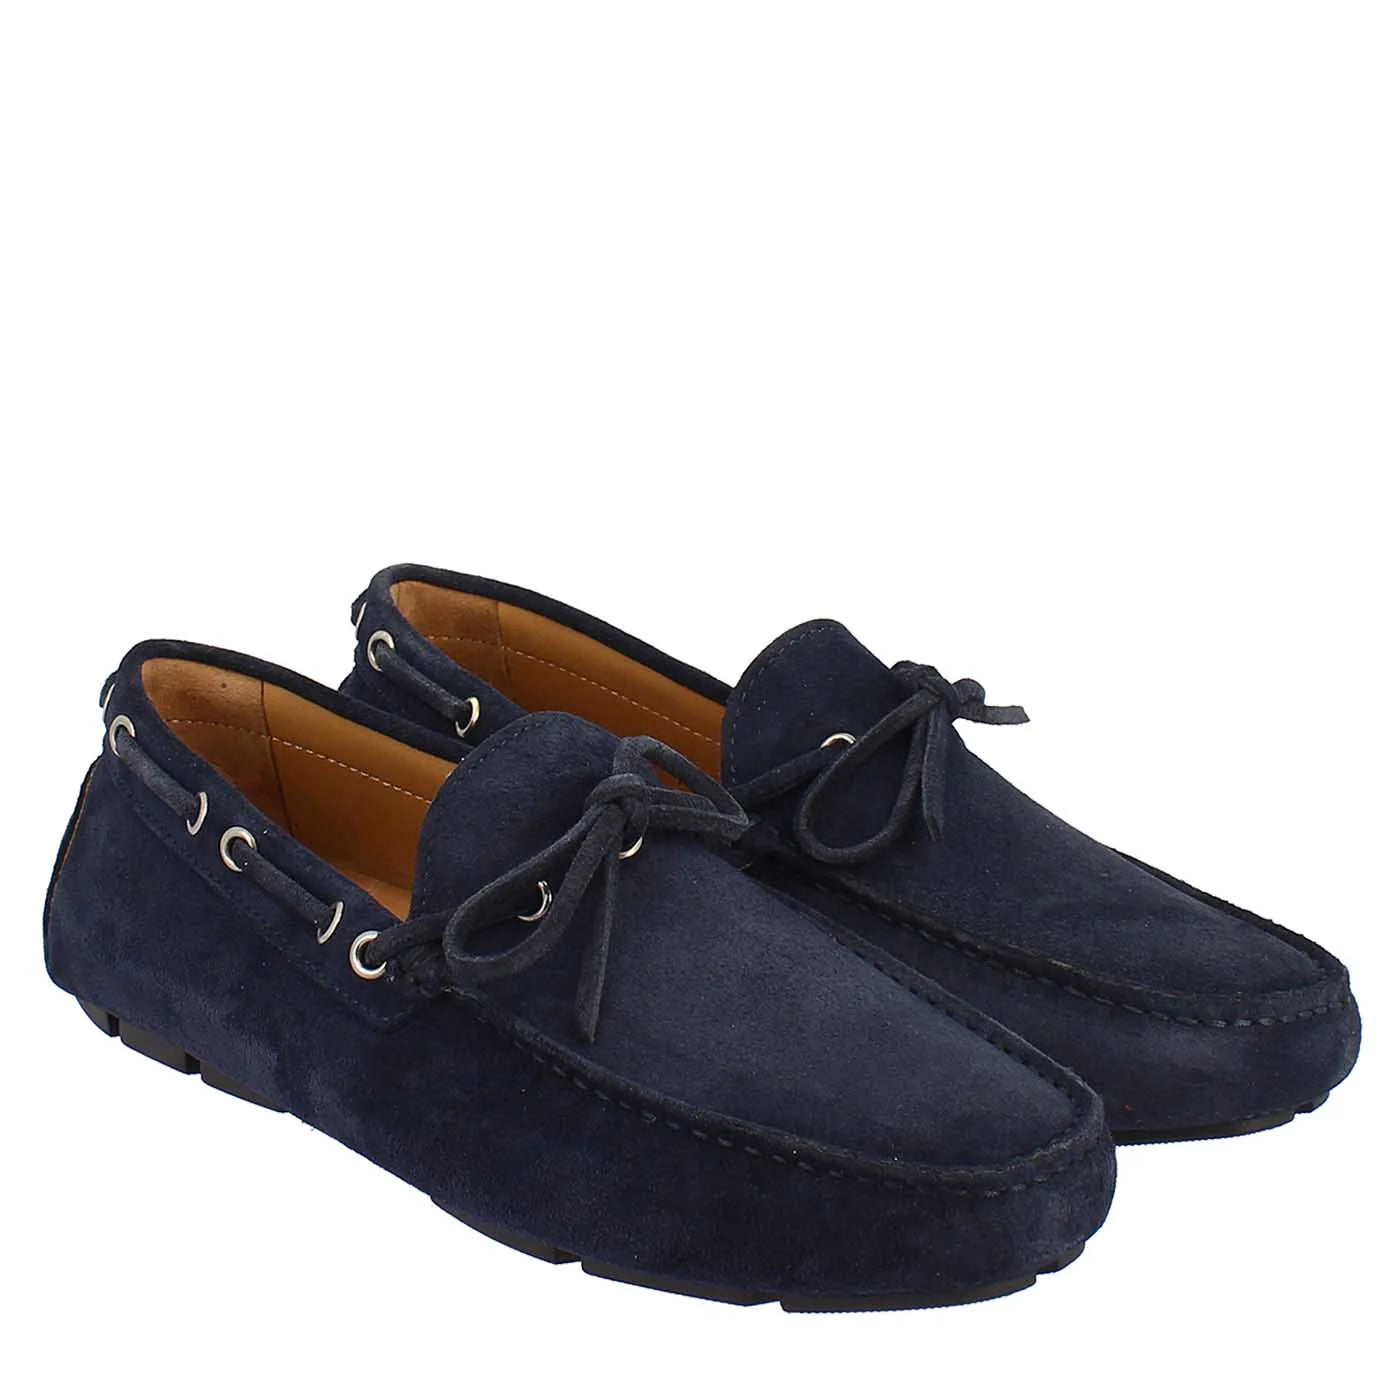 Handmade Carshoe Loafers in Navy Blue Suede